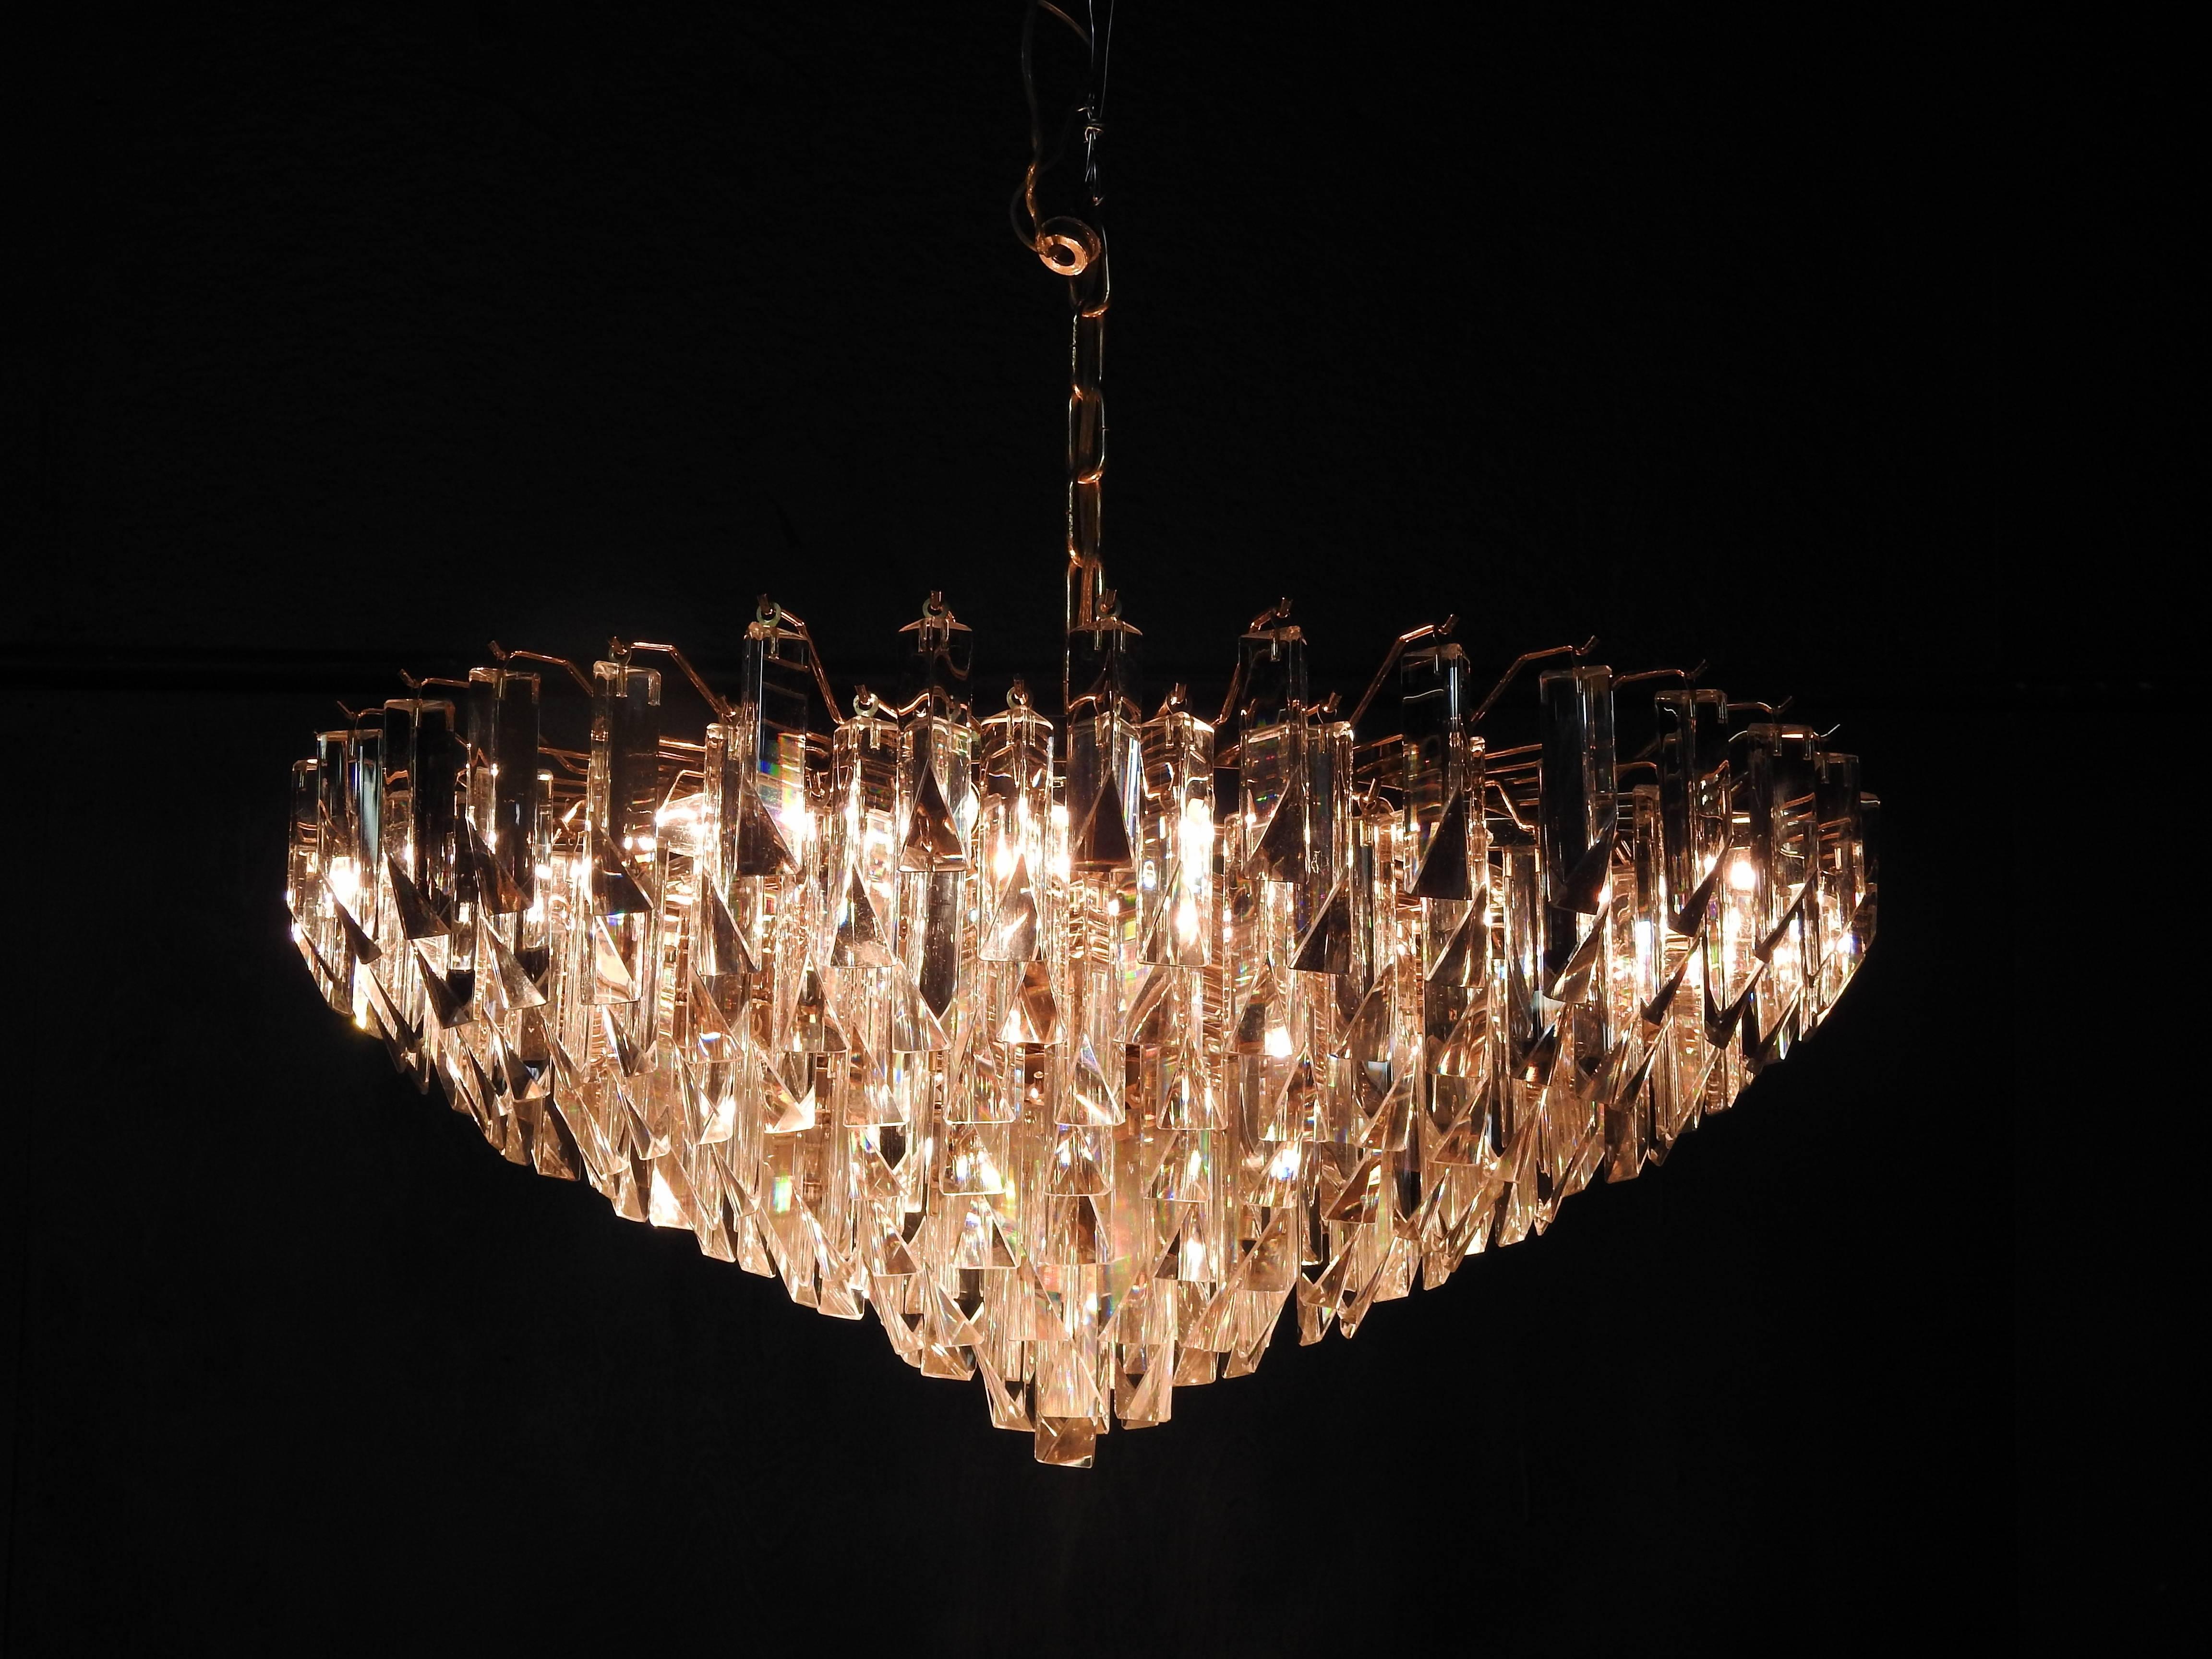 Italian Camer Glass eight-tier, eight-light chandelier with Venini Tiedri crystals, and includes four extra crystals.  The chain is 10